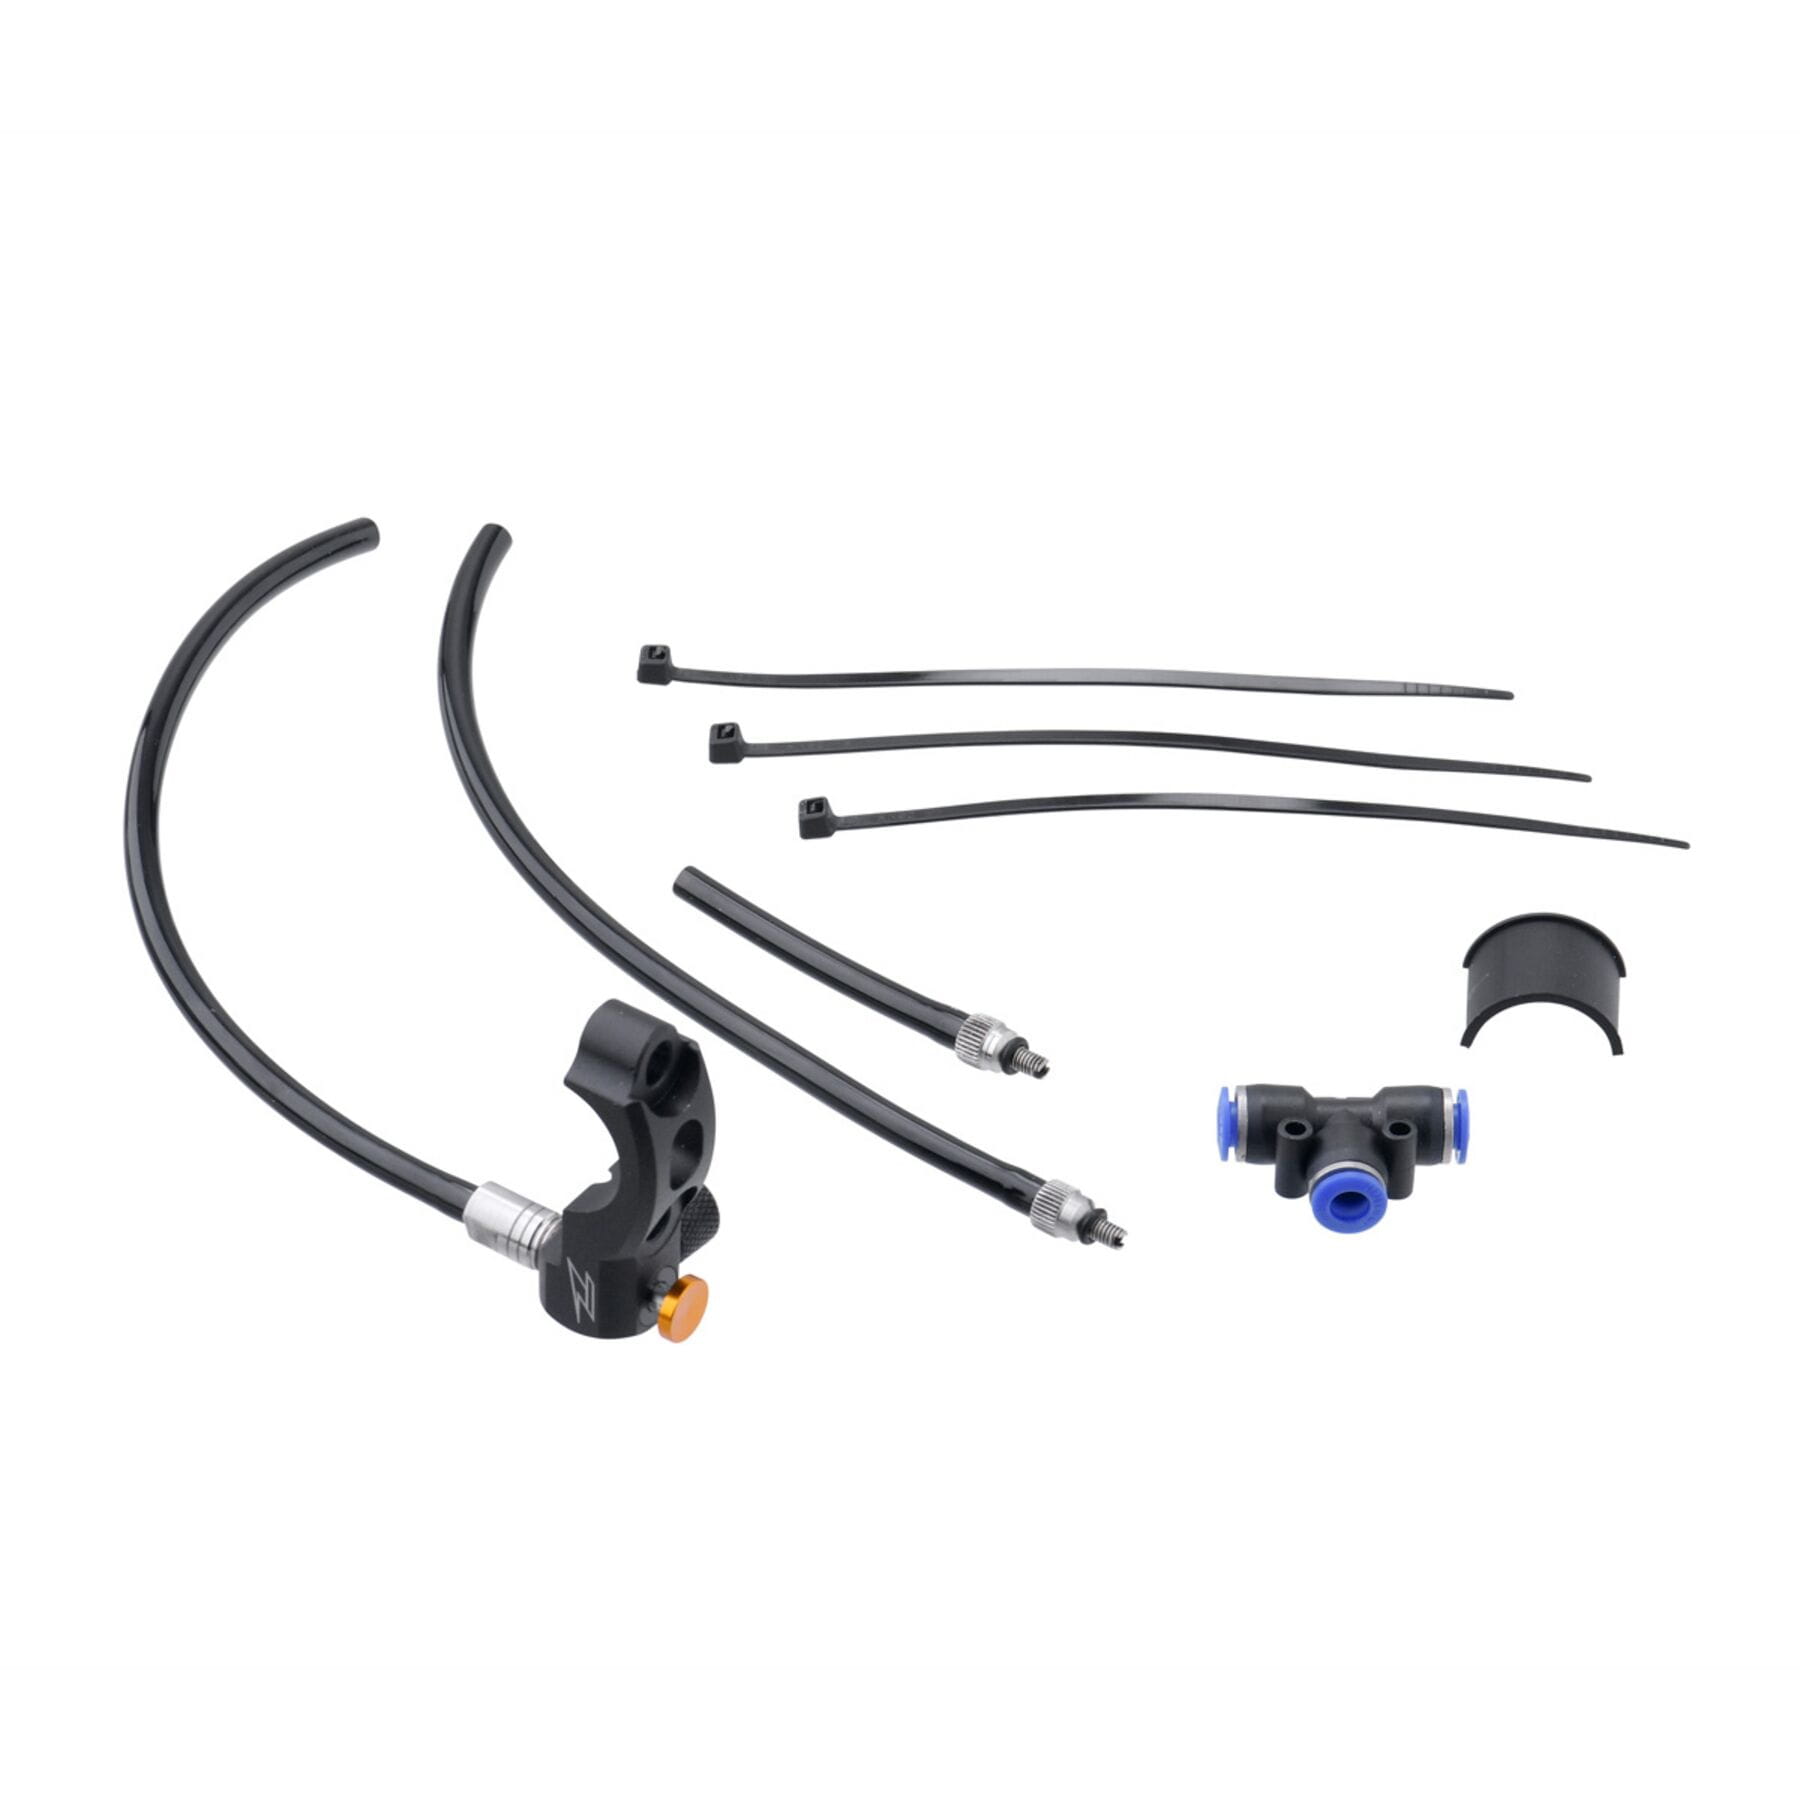 Air Bleed Kit WP for servicing suspension forks and shocks